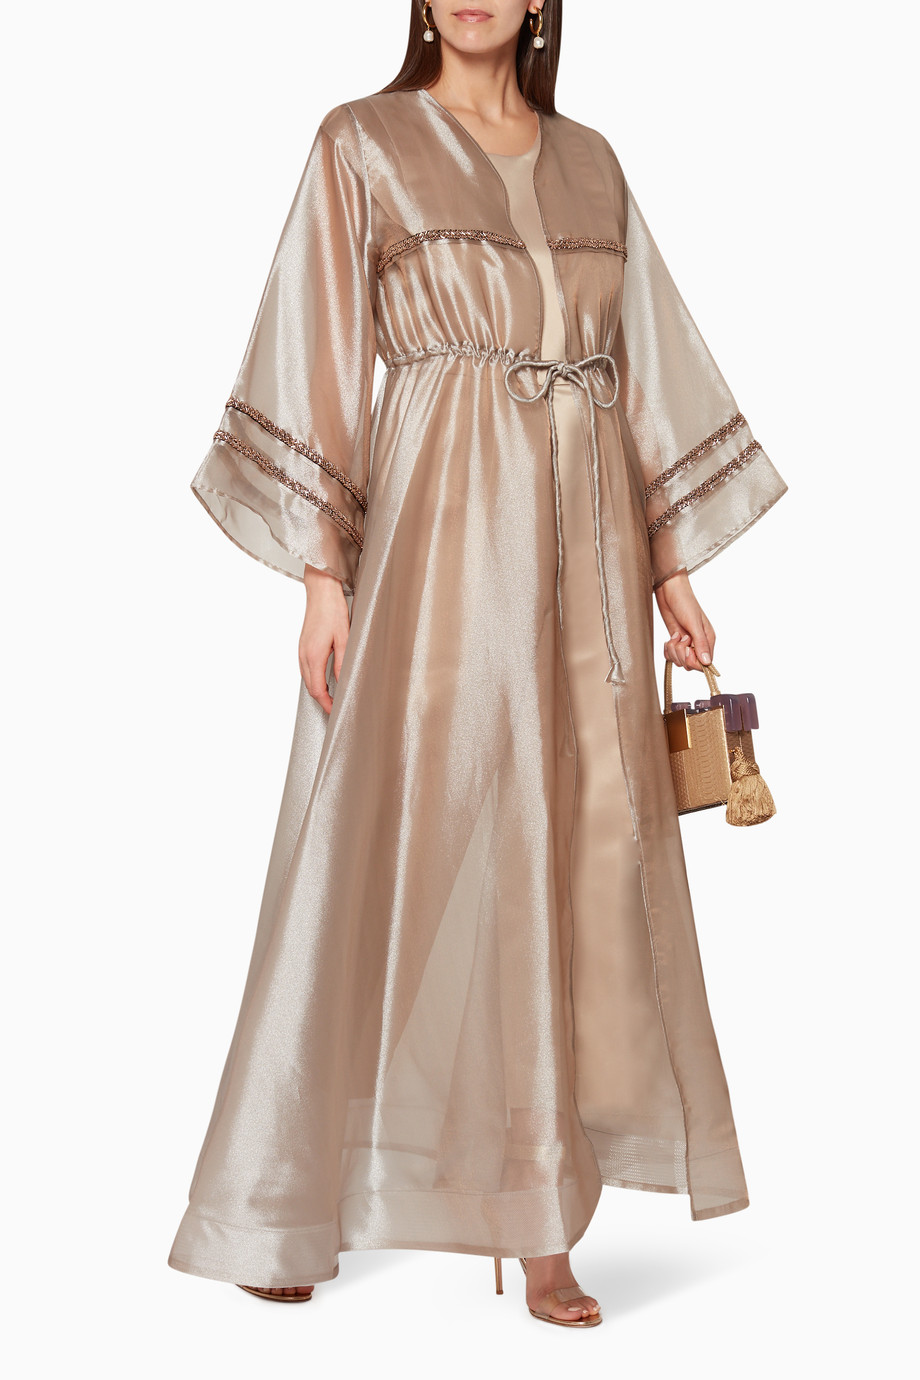 Shop Blanc 8.3 Neutral Jumpsuit with Bisht for Women | Ounass UAE